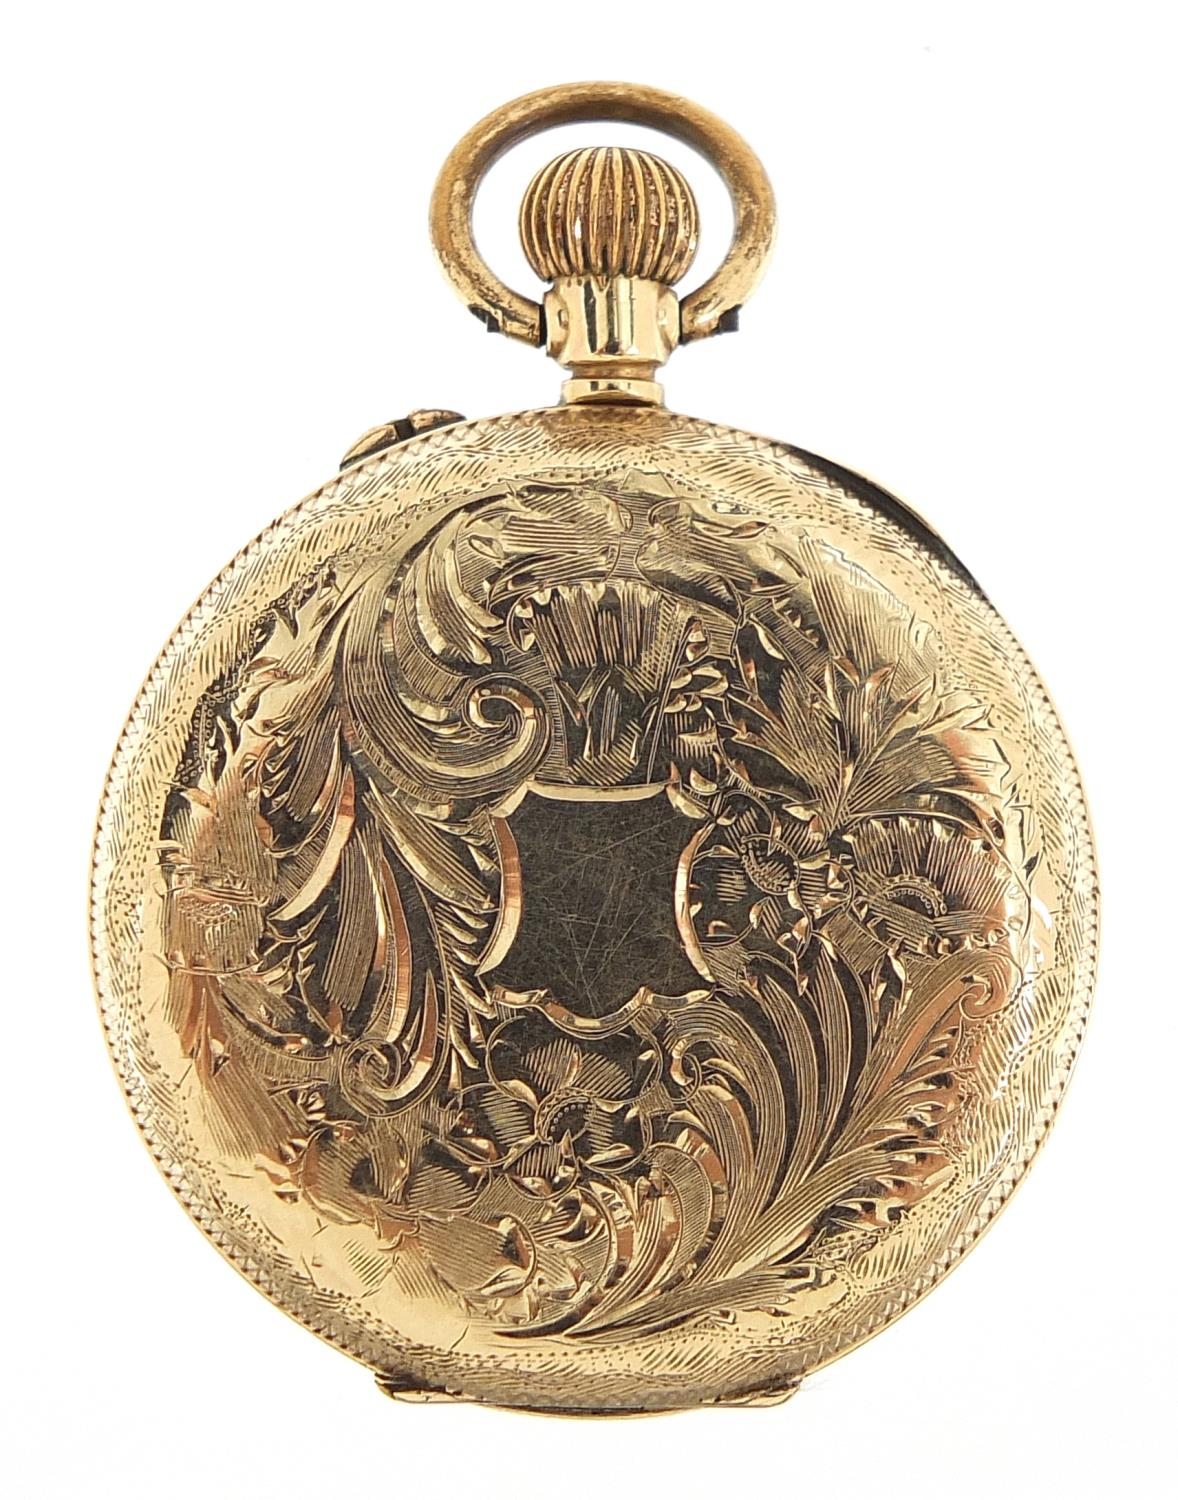 Ladies 9ct gold open face pocket watch with ornate gilt dial, 32mm in diameter, 25.2g - Image 2 of 4